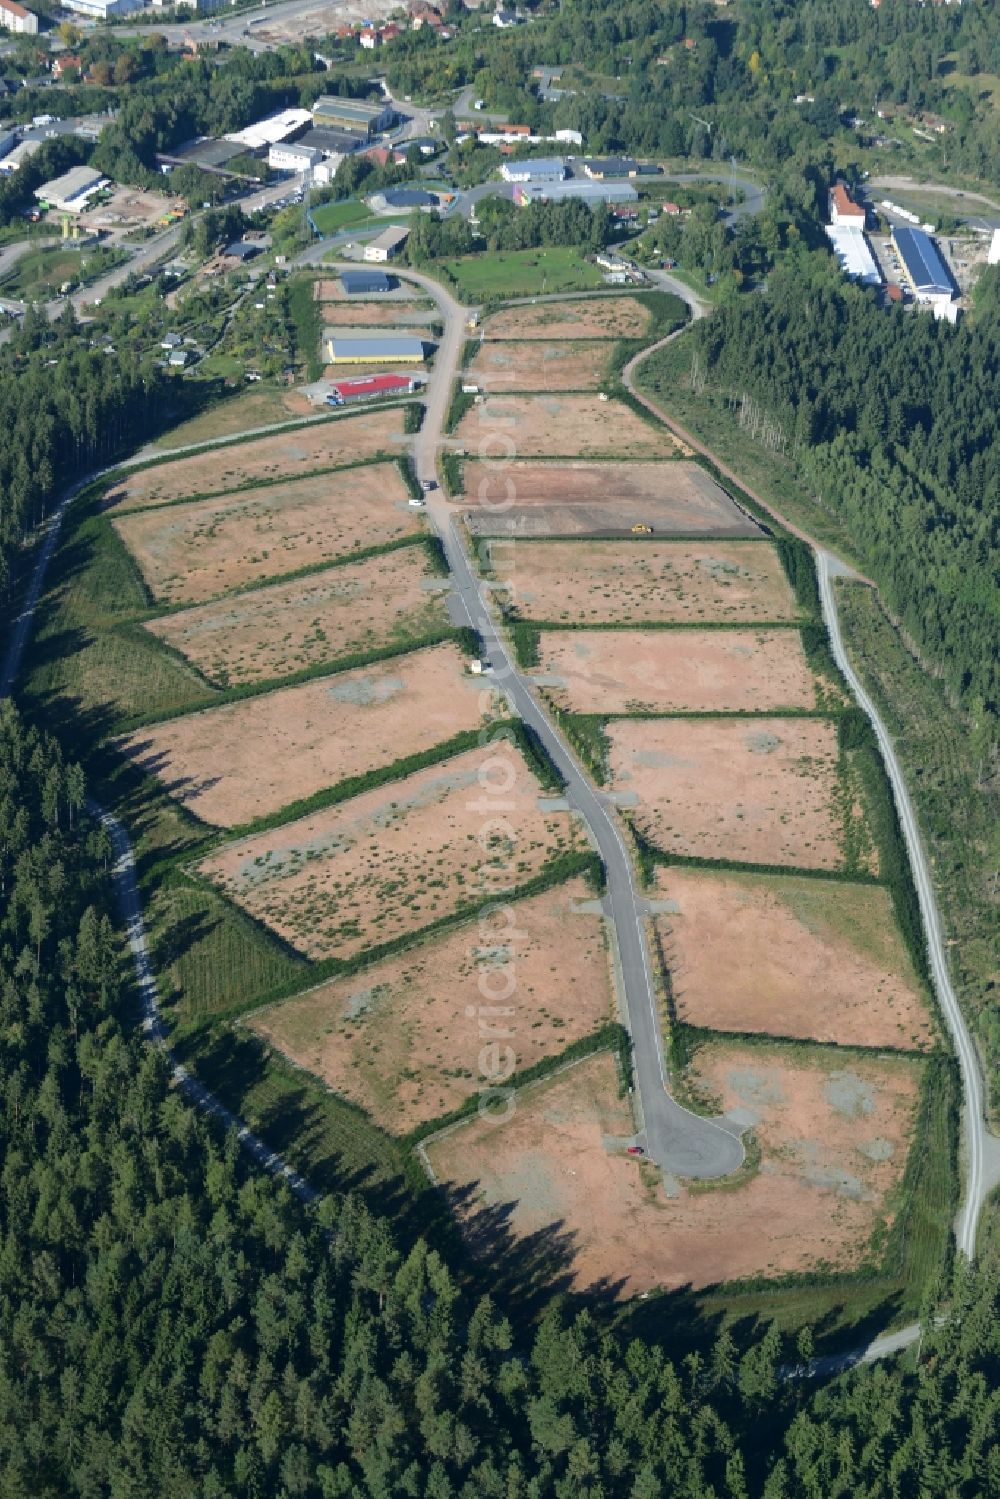 Suhl from the bird's eye view: Construction site for the new building and development of the commercial area Sehmar 2 in a forest in the South of Suhl in the state of Thuringia. Parcells and company grounds are developed